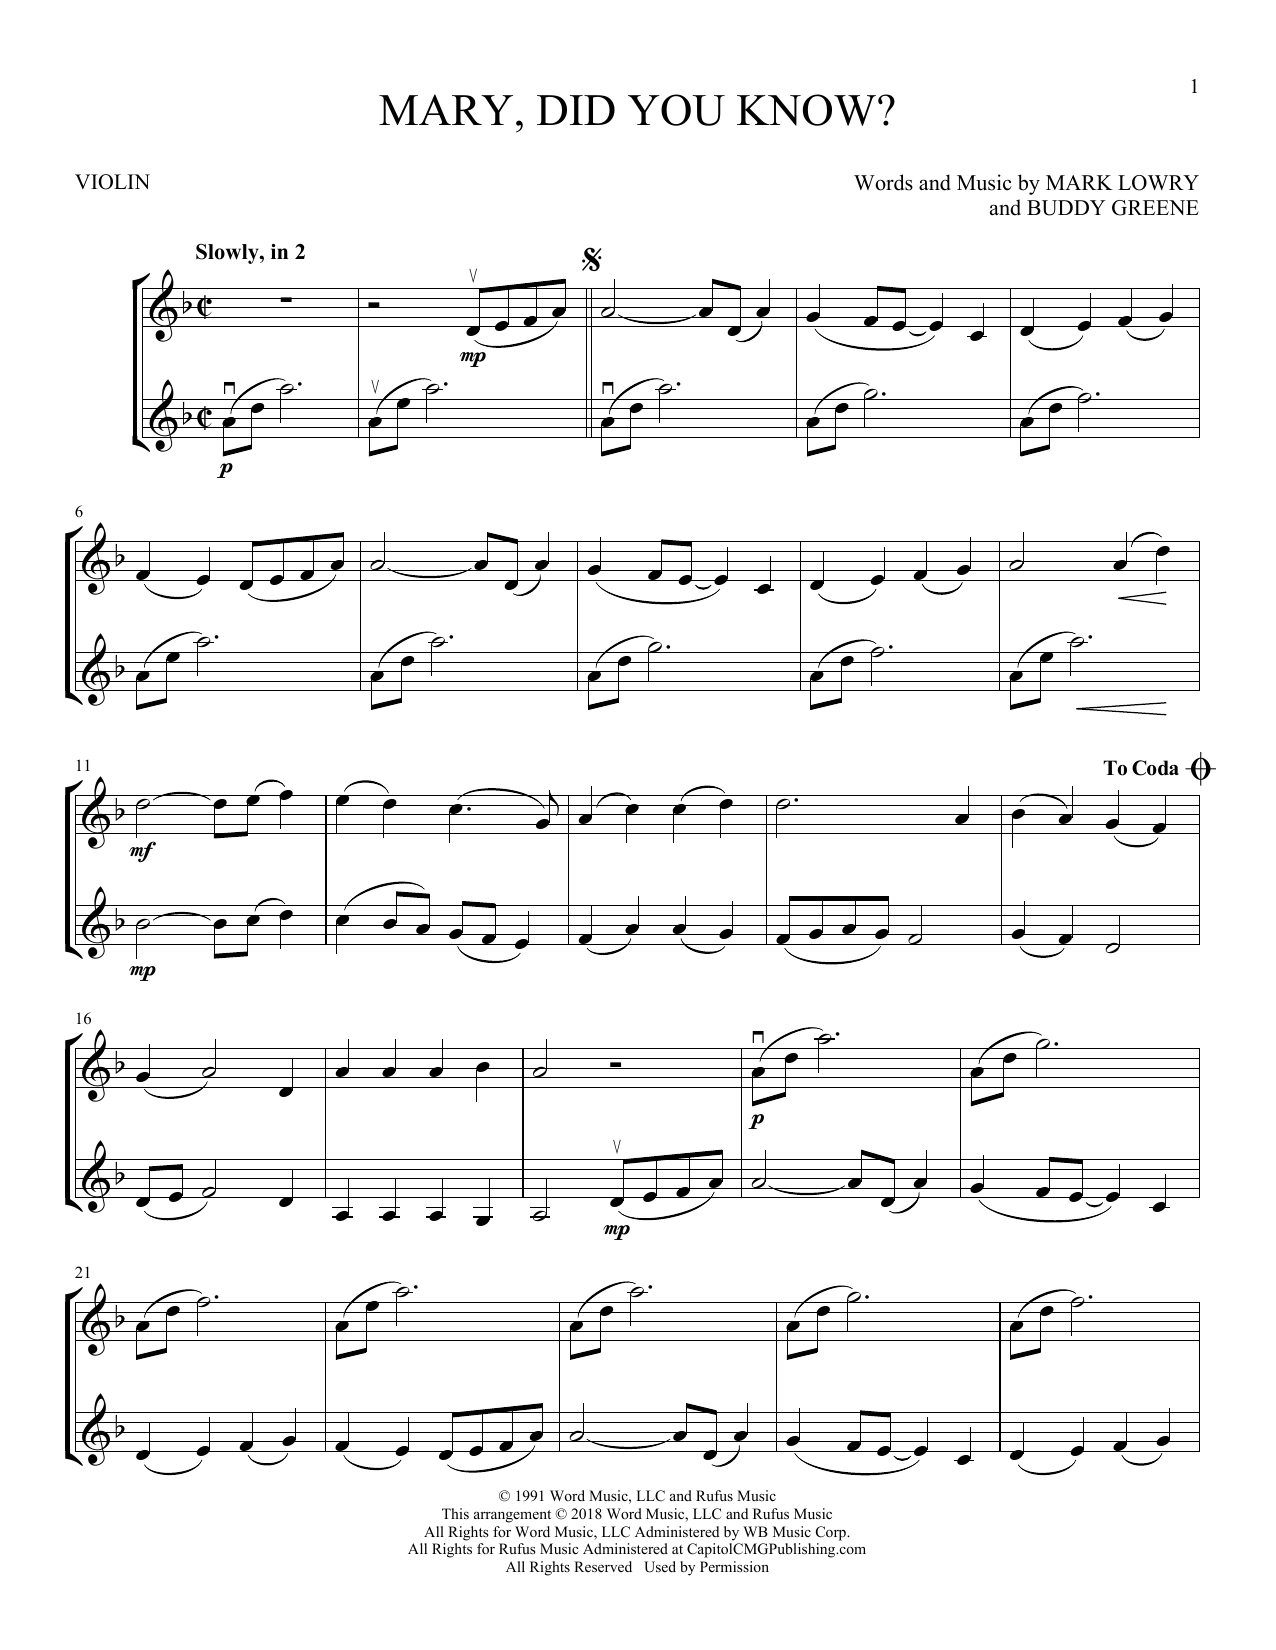 Mary Did You Know Chords Buddy Greene Mary Did You Know Sheet Music Notes Chords Download Printable Vlndt Sku 255323